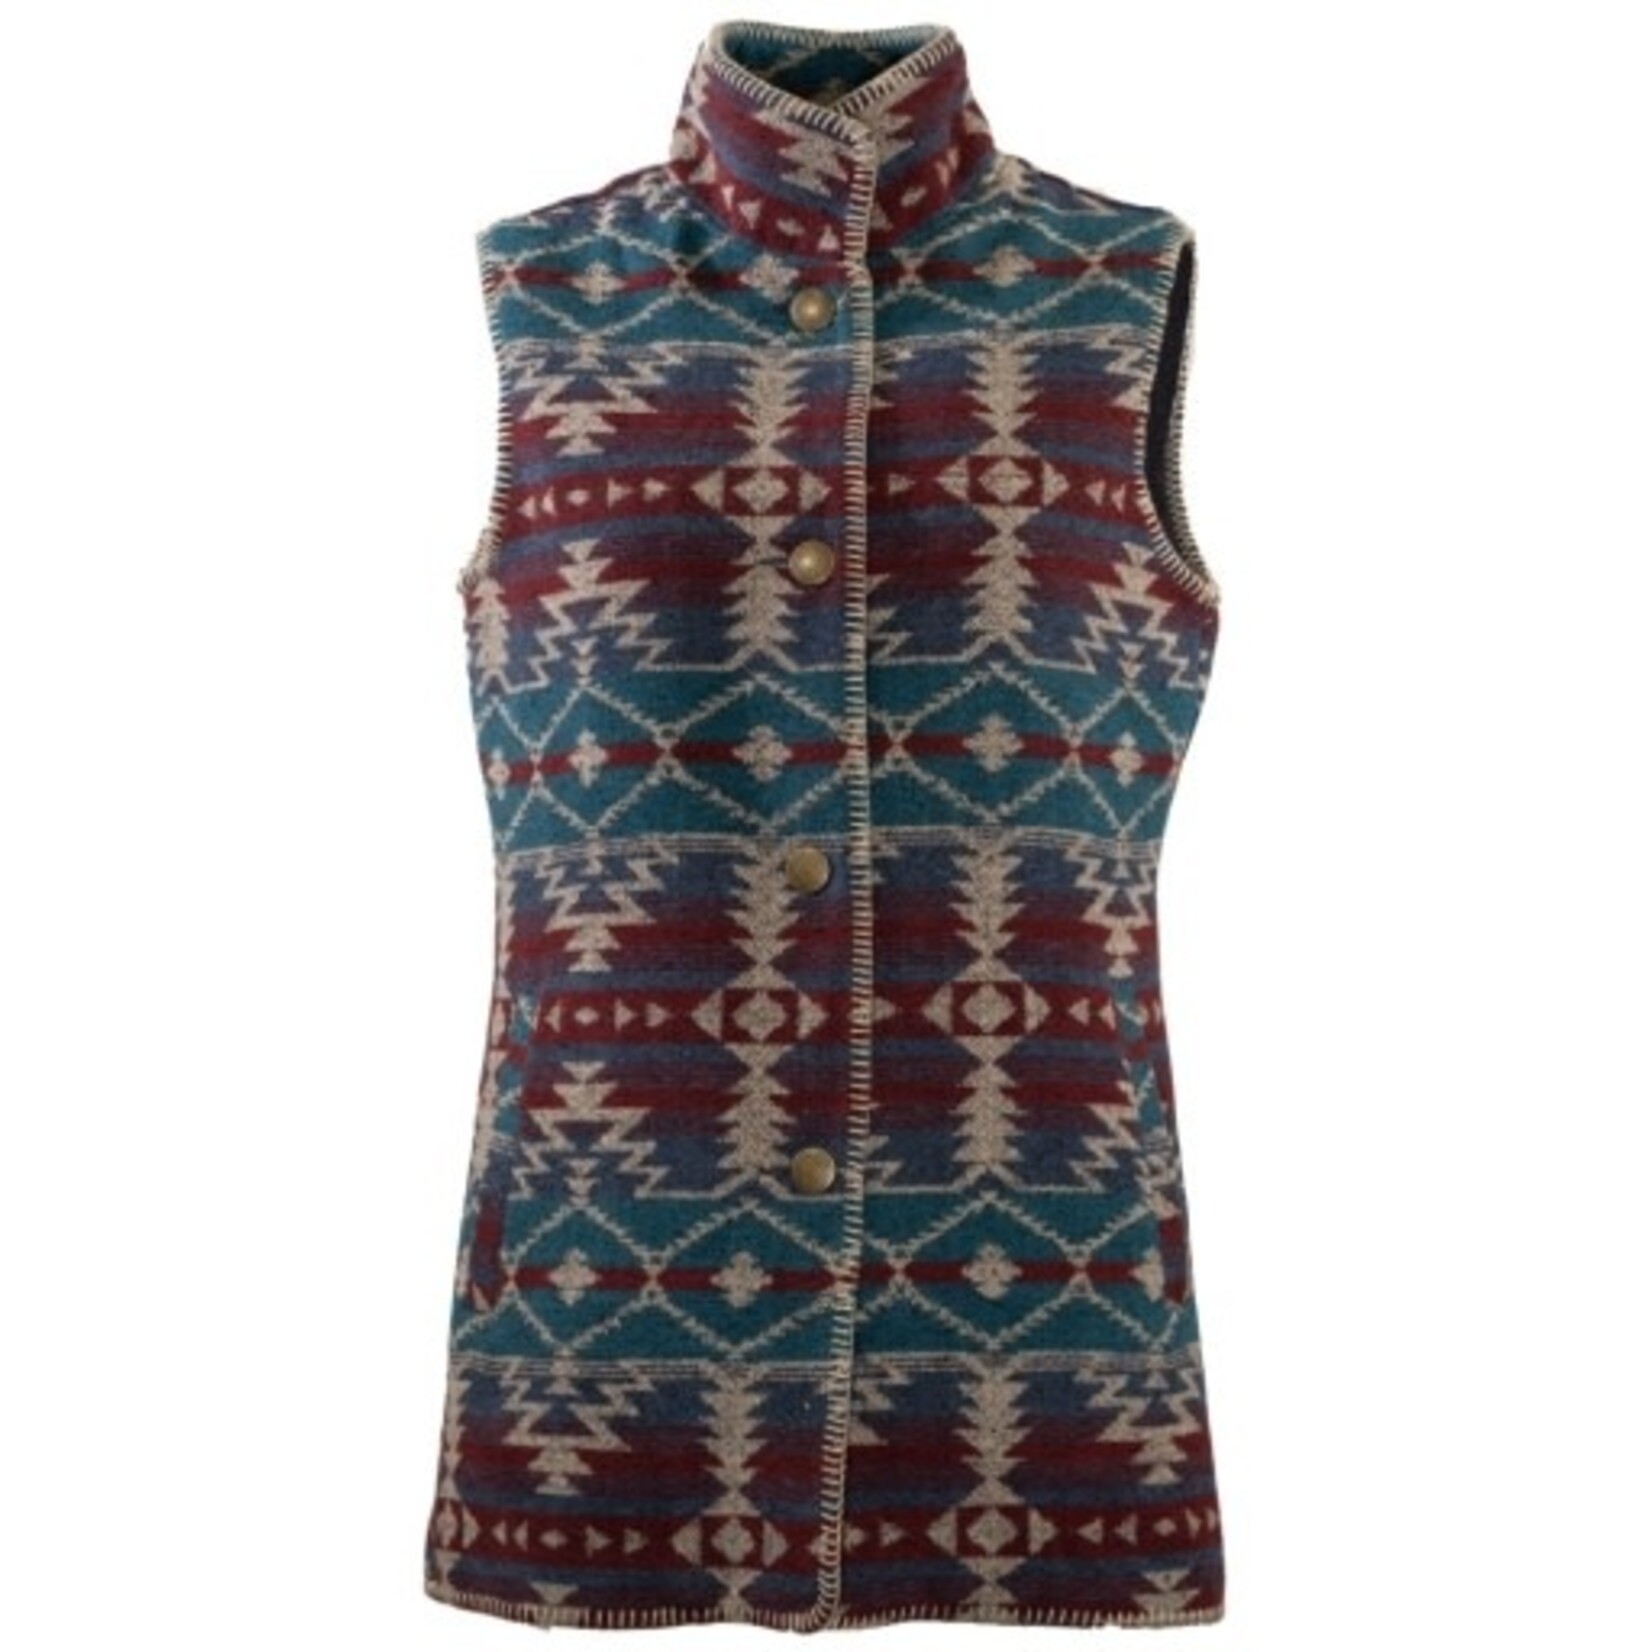 Outback Trading Co. Outback Trading Co. Ladies Stockard Vest